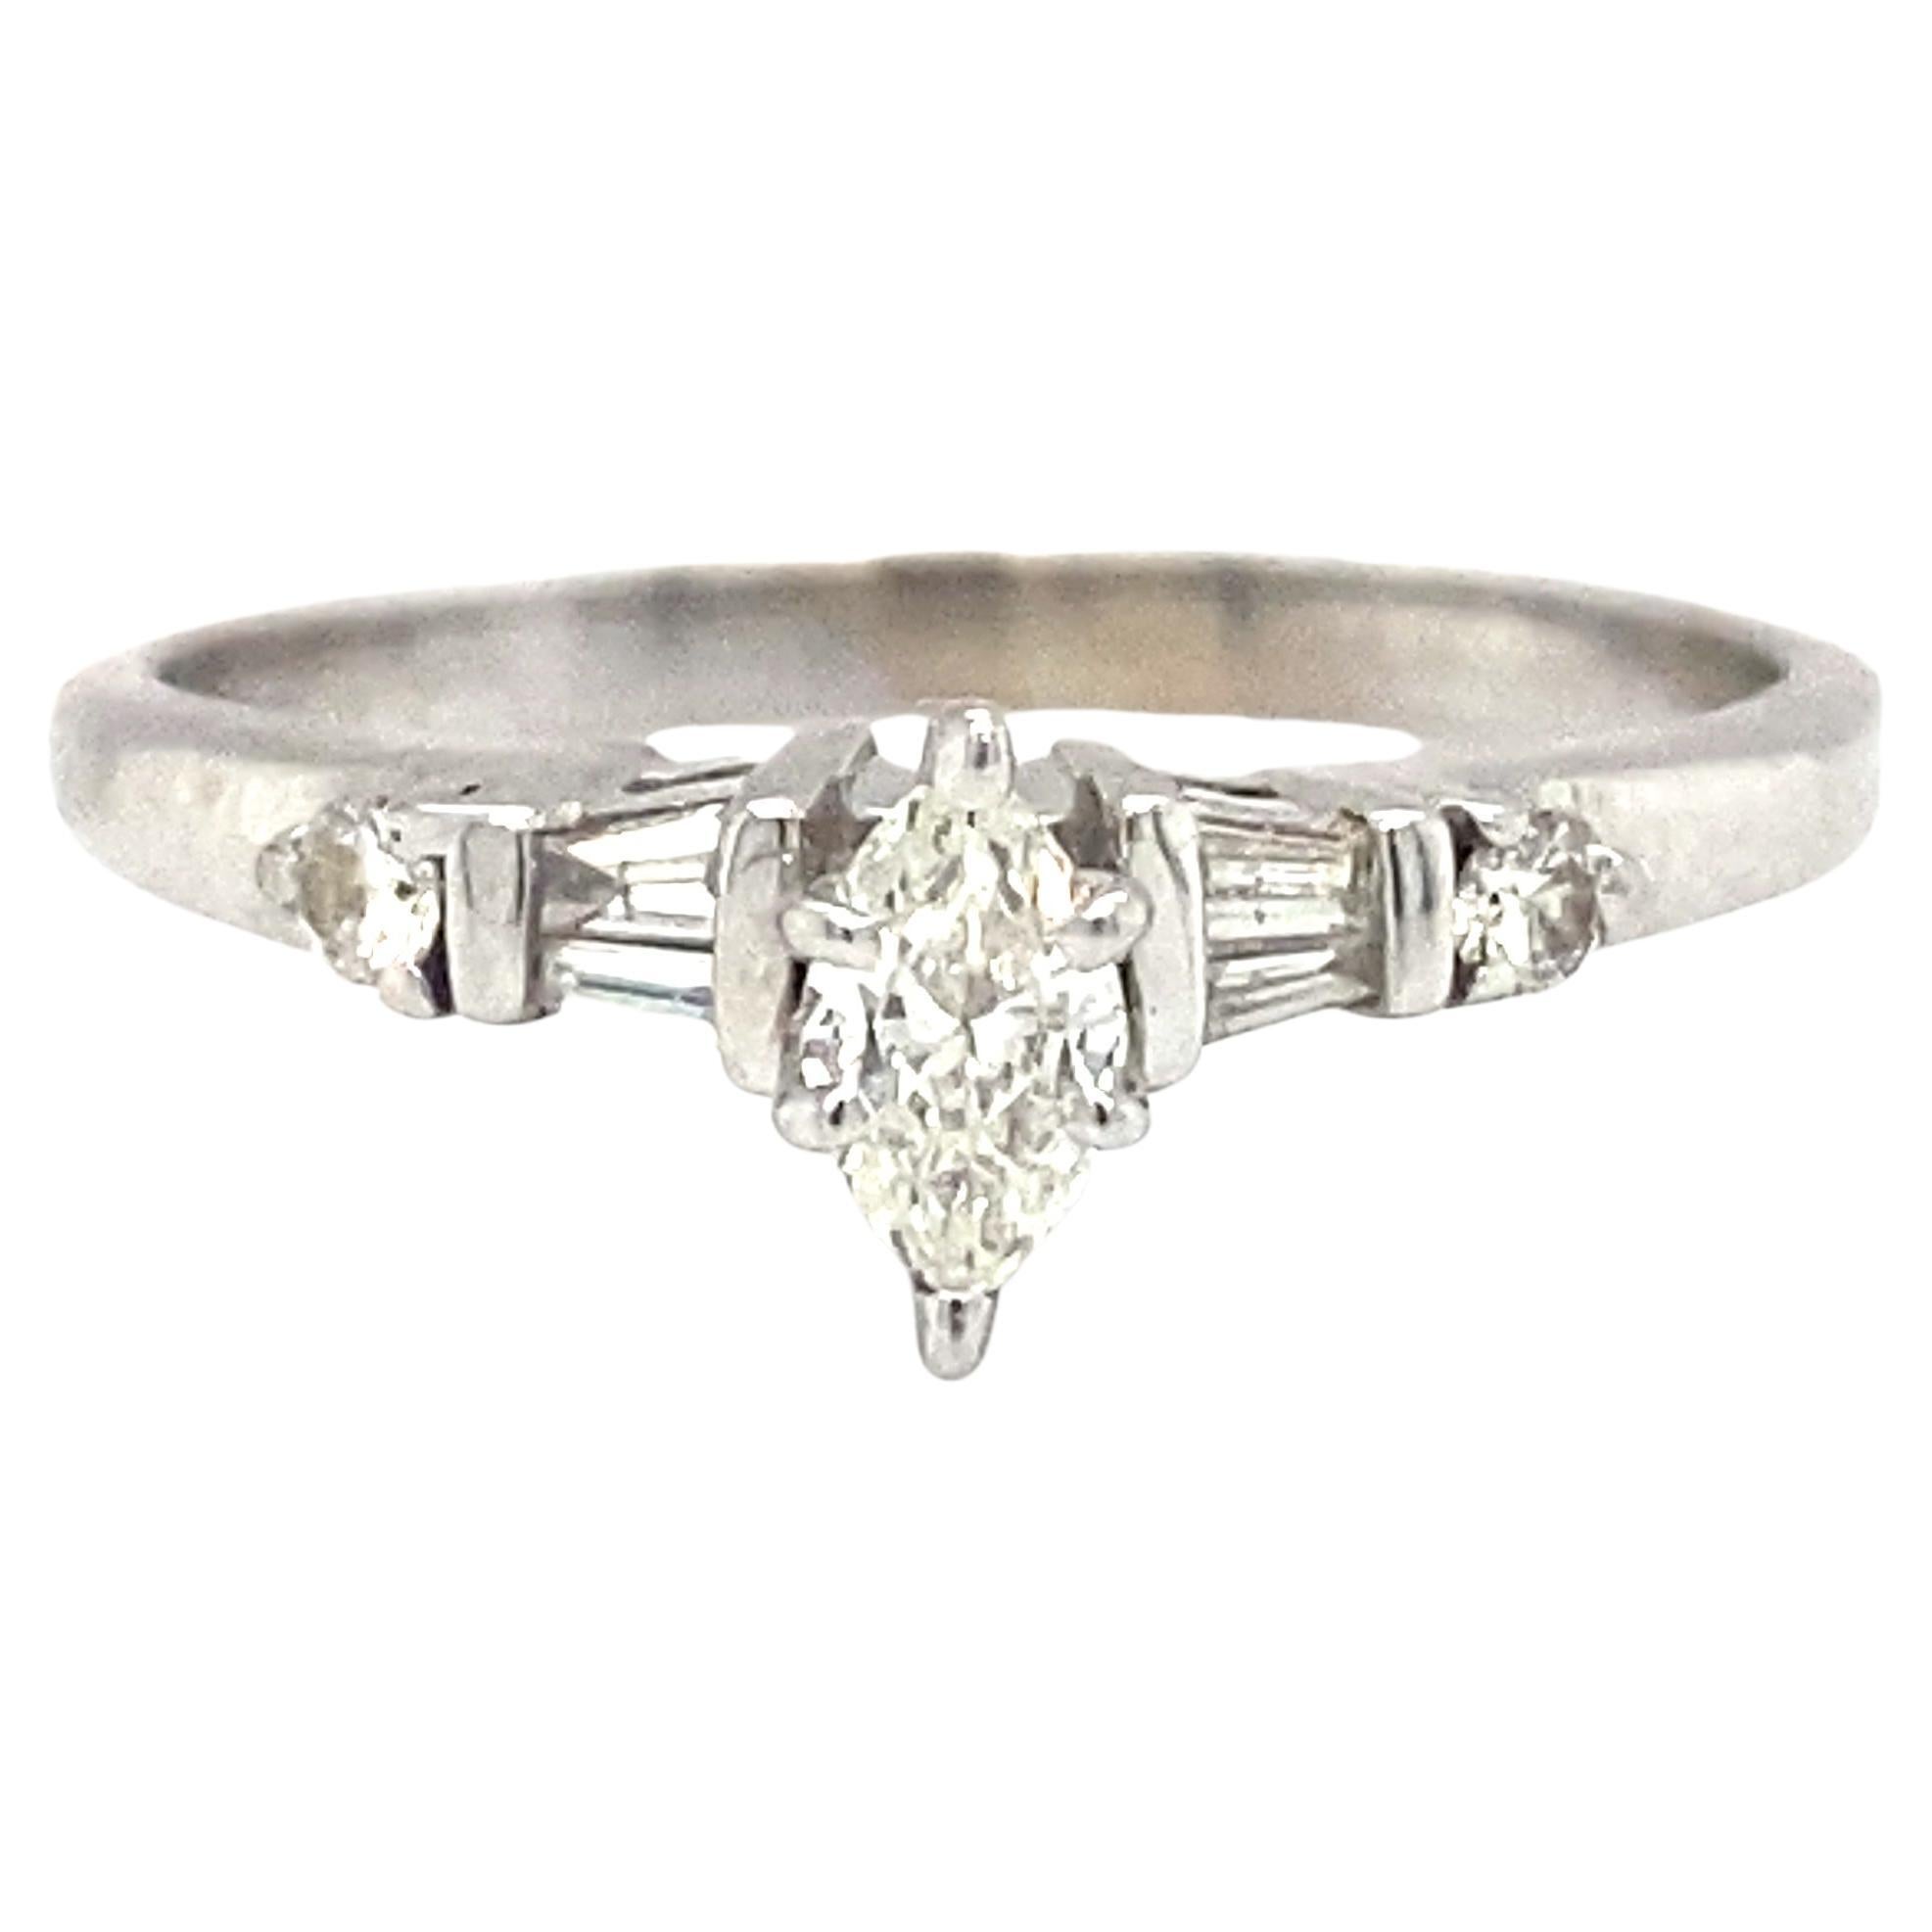 Circa 1950s 0.25ct Marquise Diamond Engagement Ring in 14K White Gold For Sale